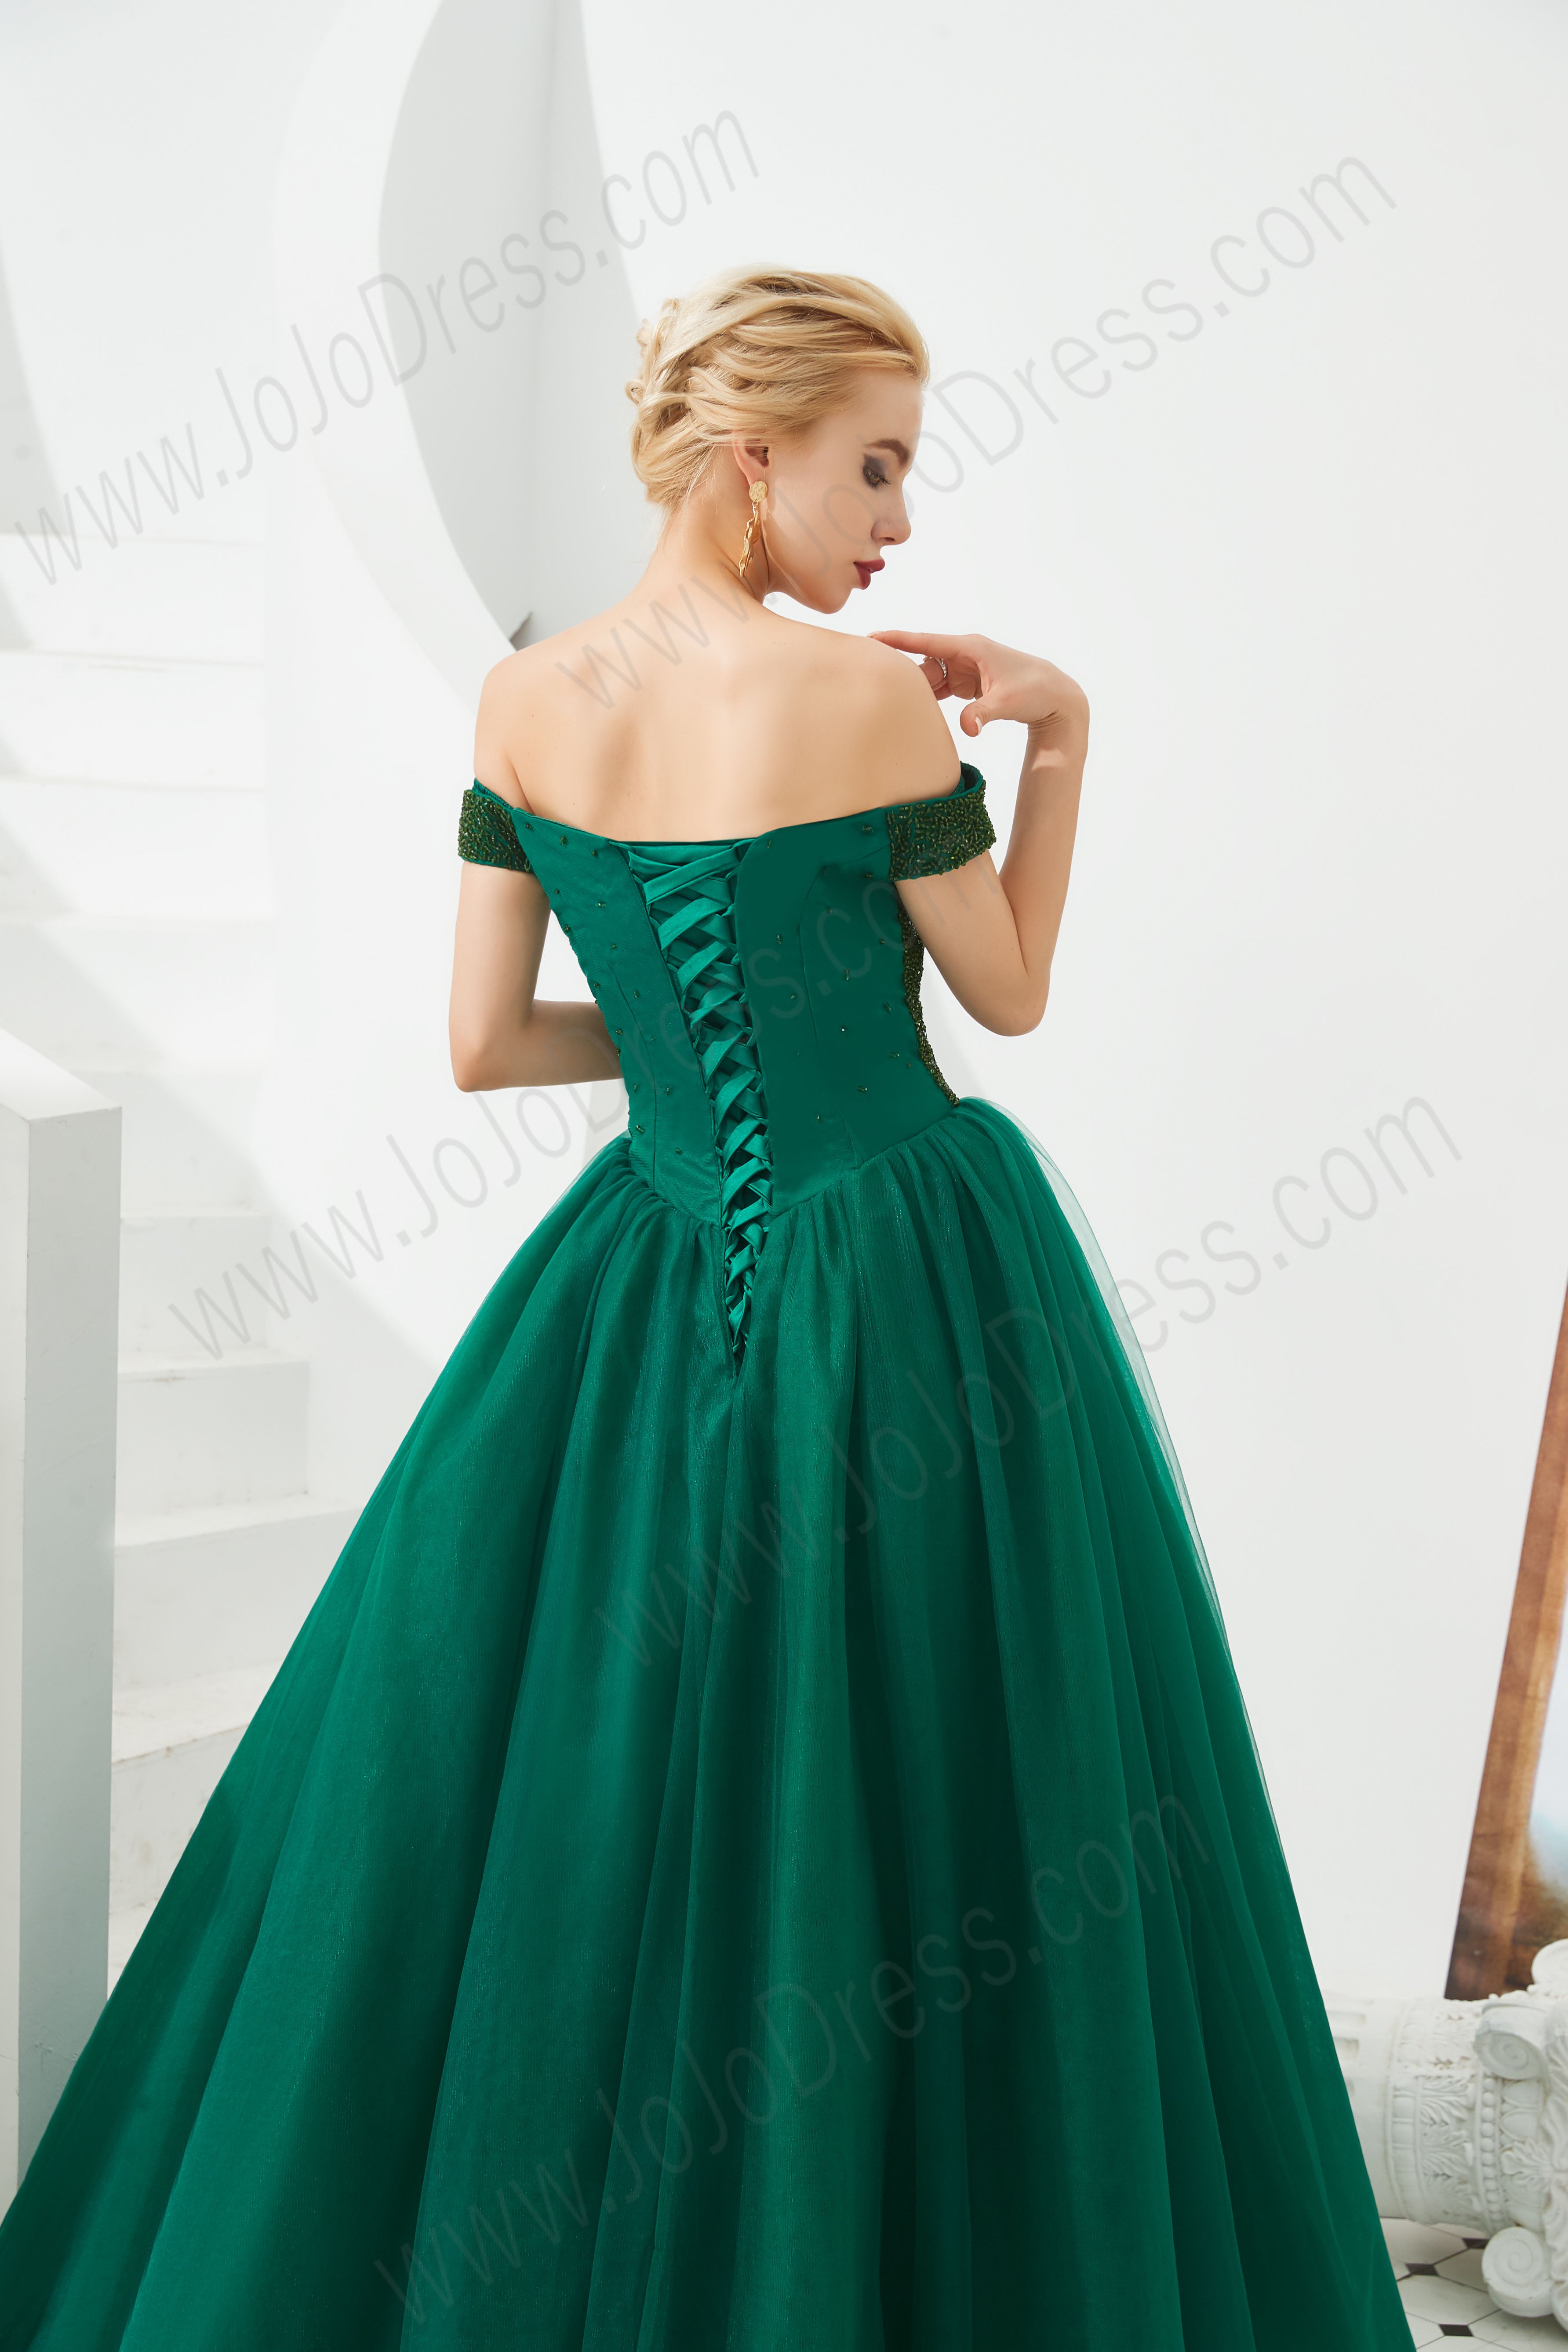 Emerald Hunter Green Lace Mermaid Long Green Prom Dress With Detachable  Train Modest Long Sleeve Formal Evening Wear From Verycute, $76.39 |  DHgate.Com